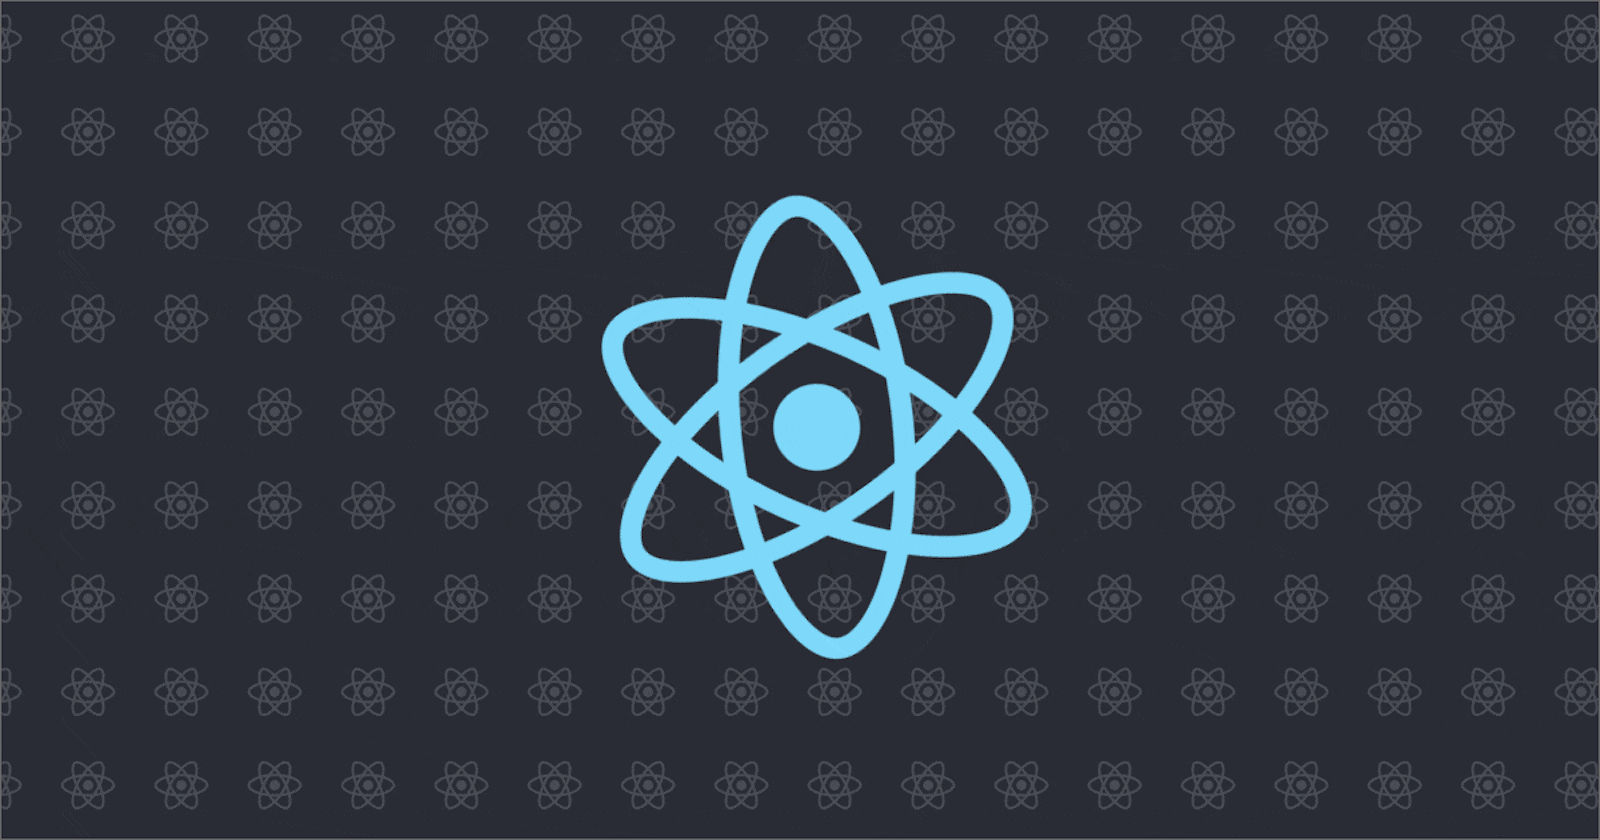 React and effect hook